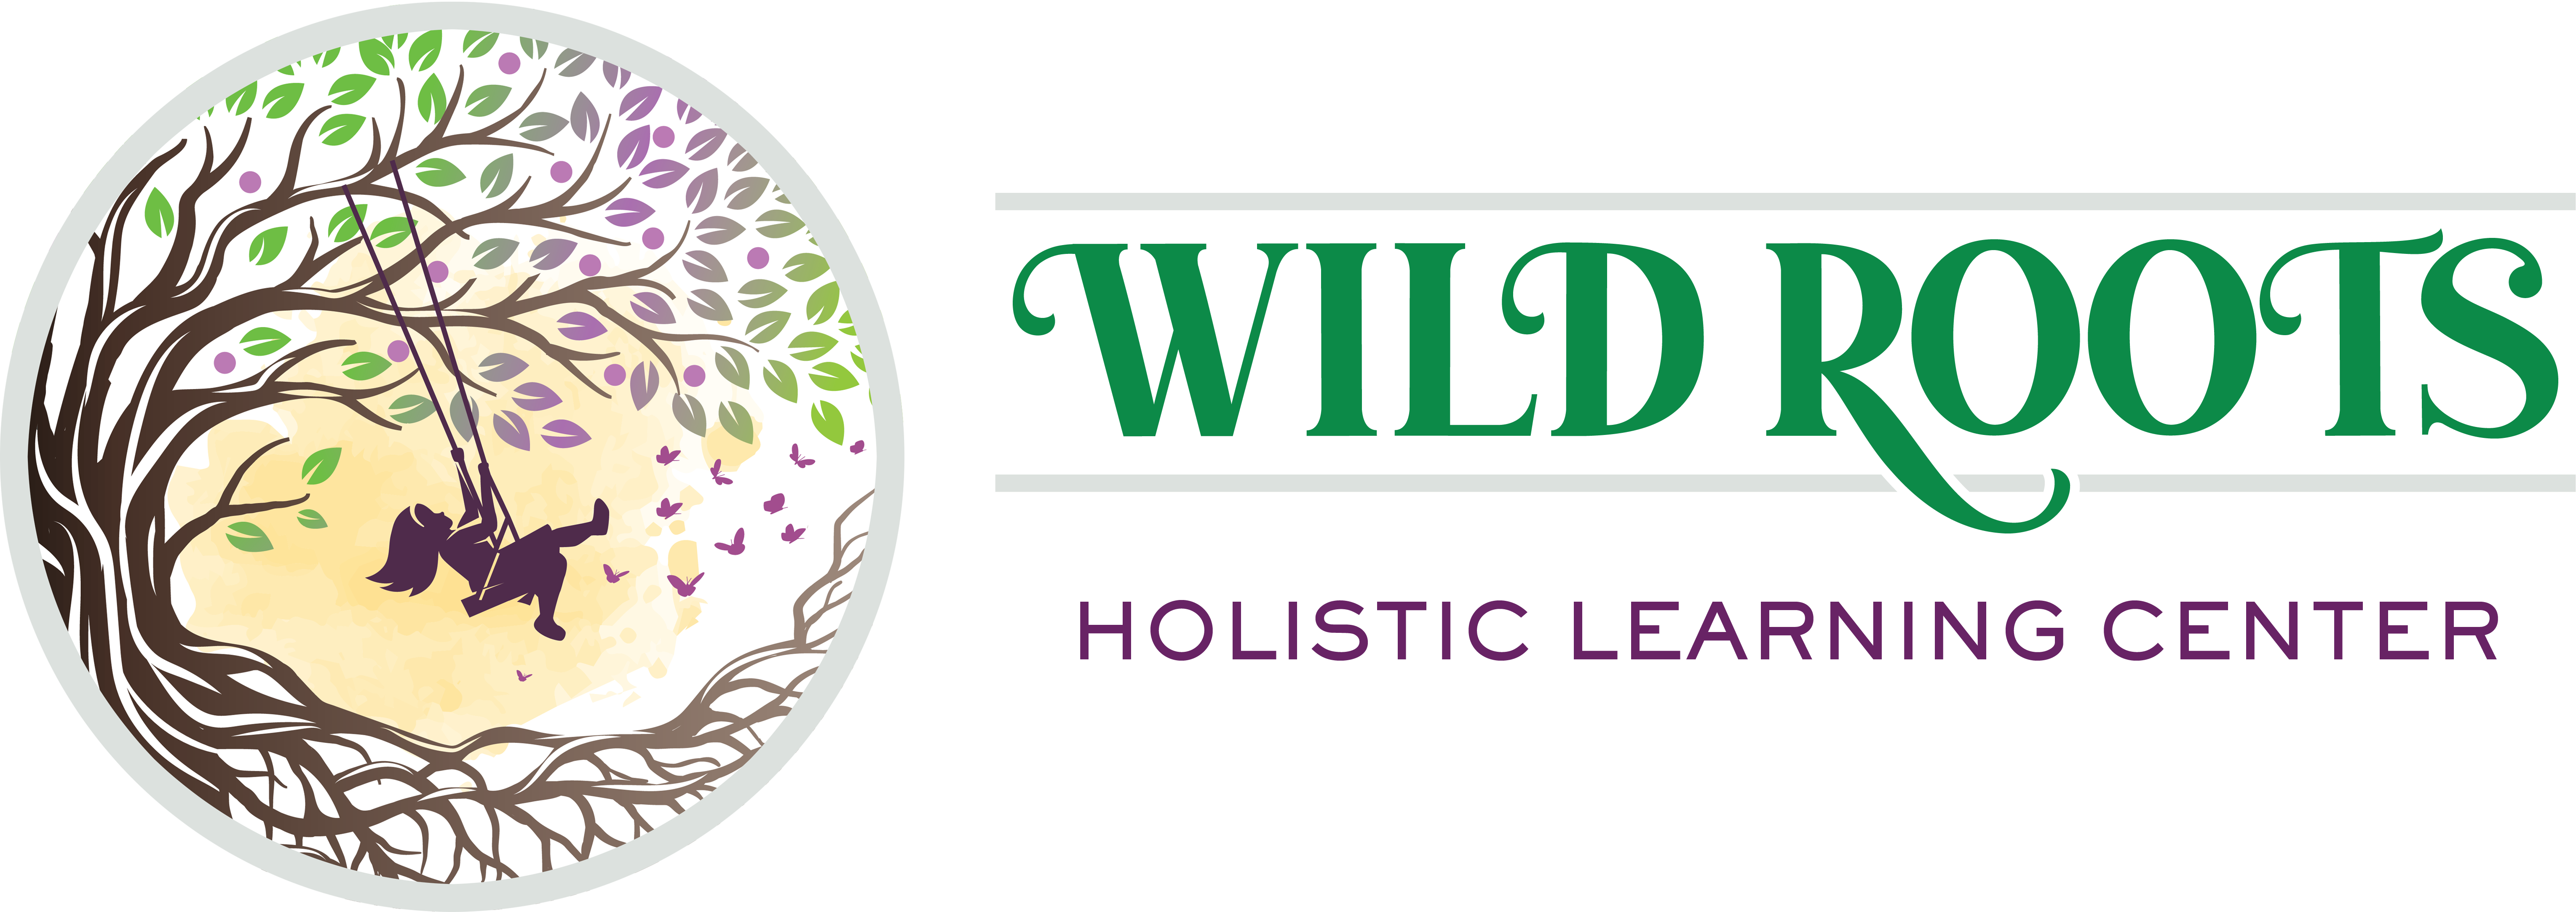 Wild-Roots-Holistic-Learning-Center-Horizontal-Logo-Butterflies-1